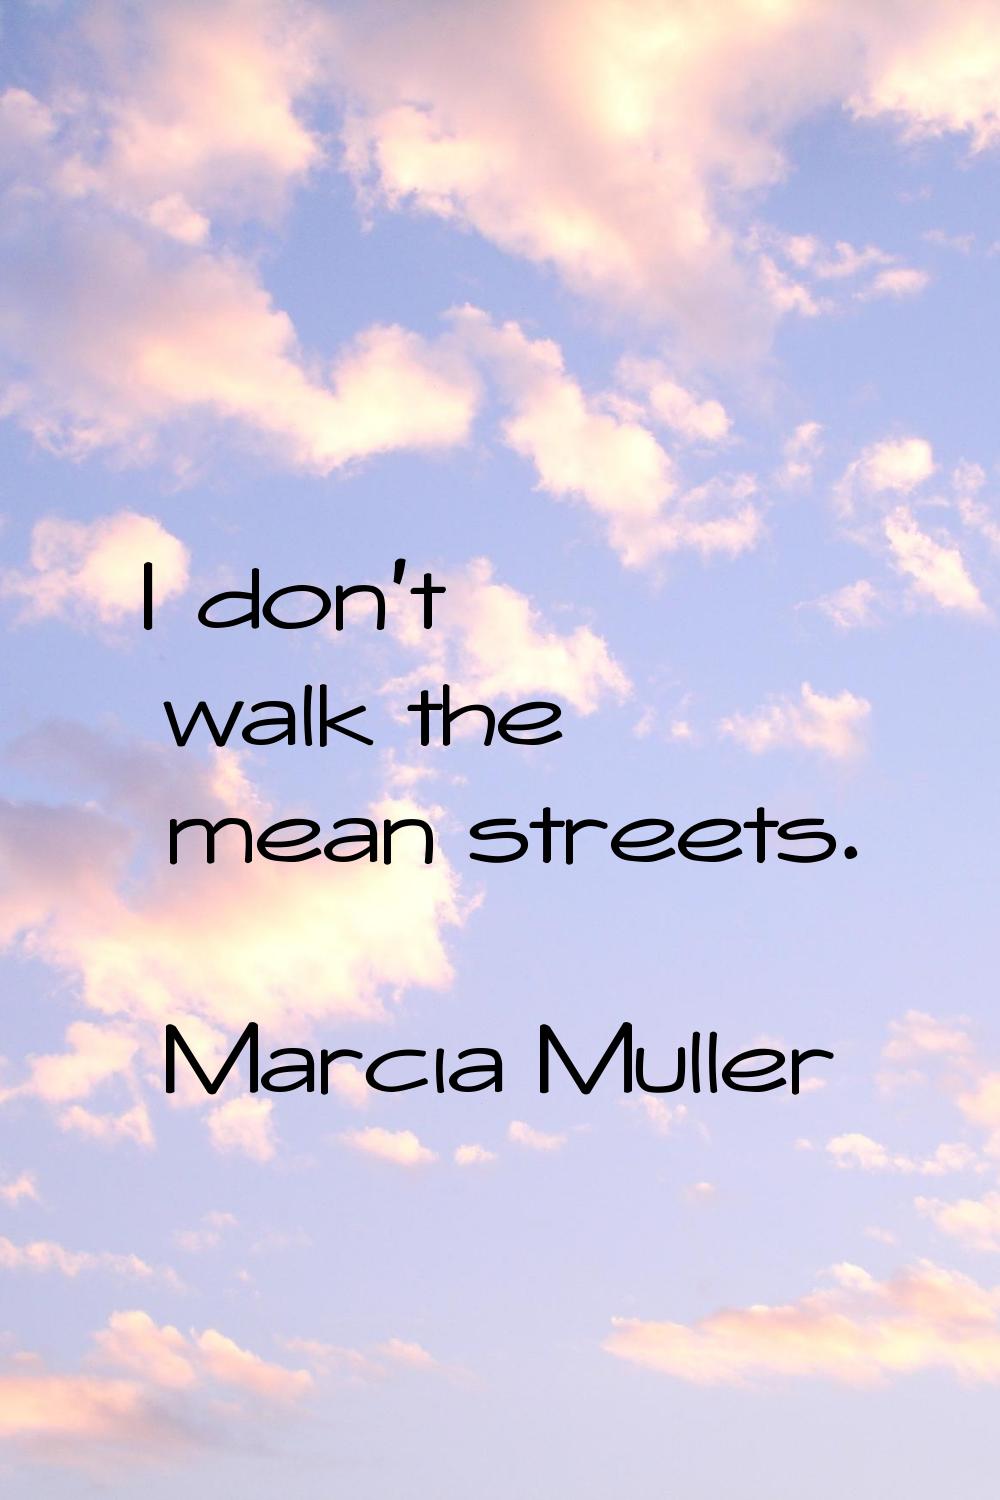 I don't walk the mean streets.